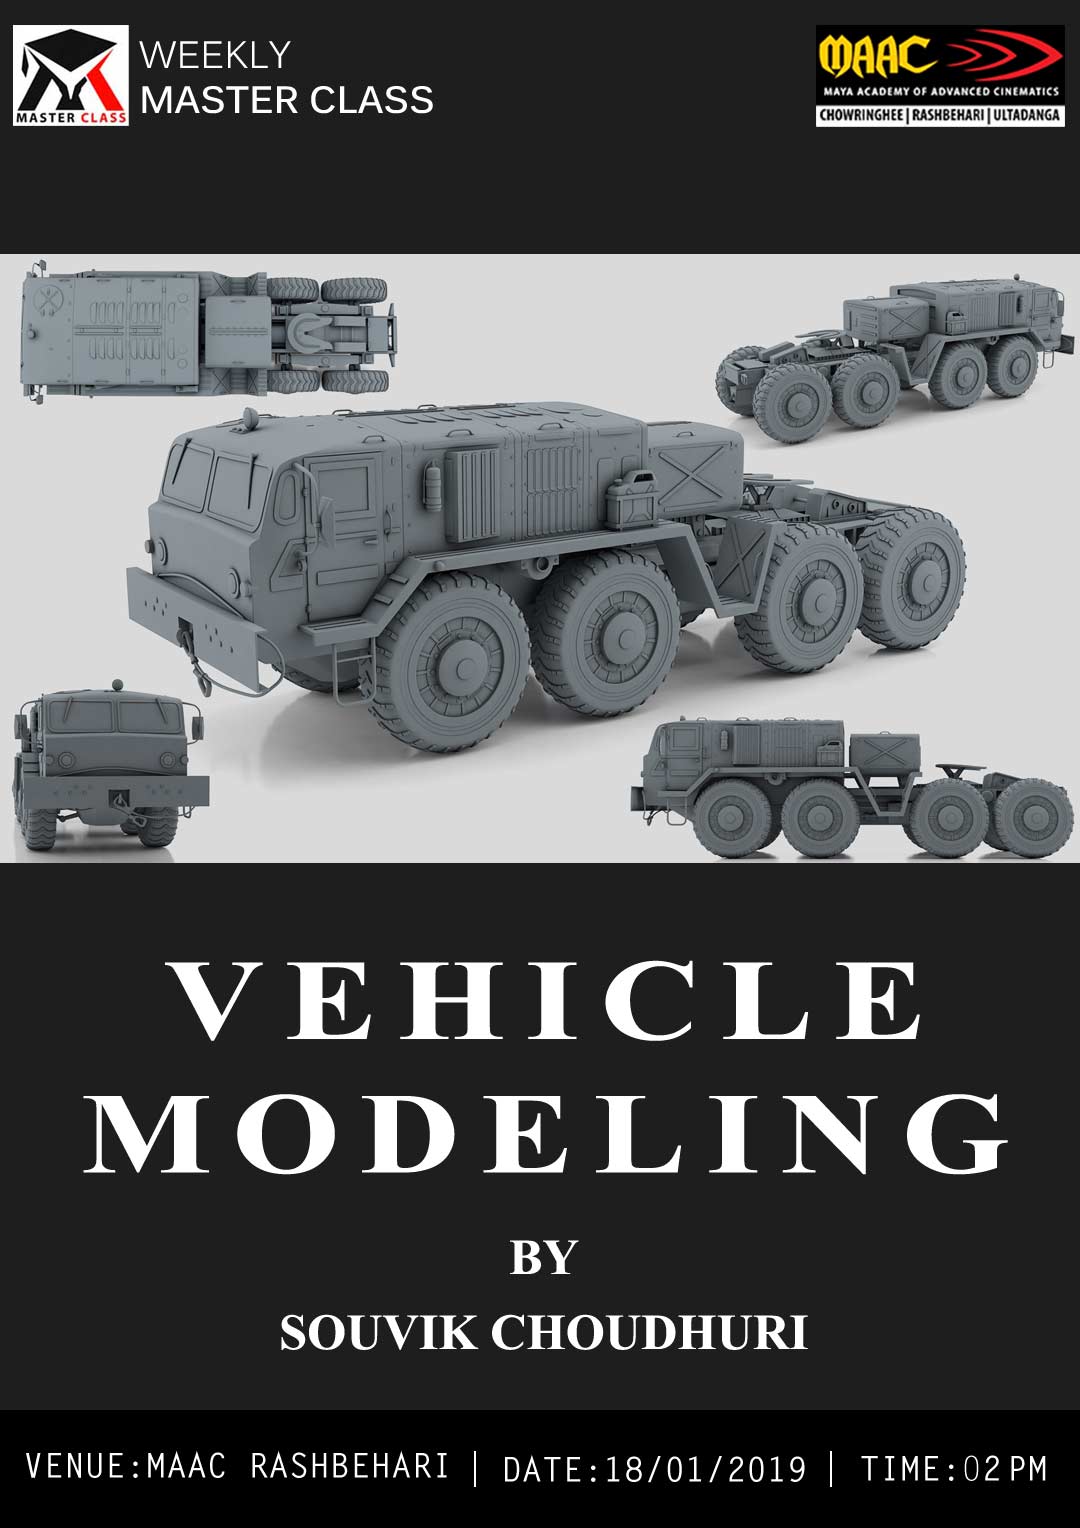 Weekly Master Class on Vehicle Modeling